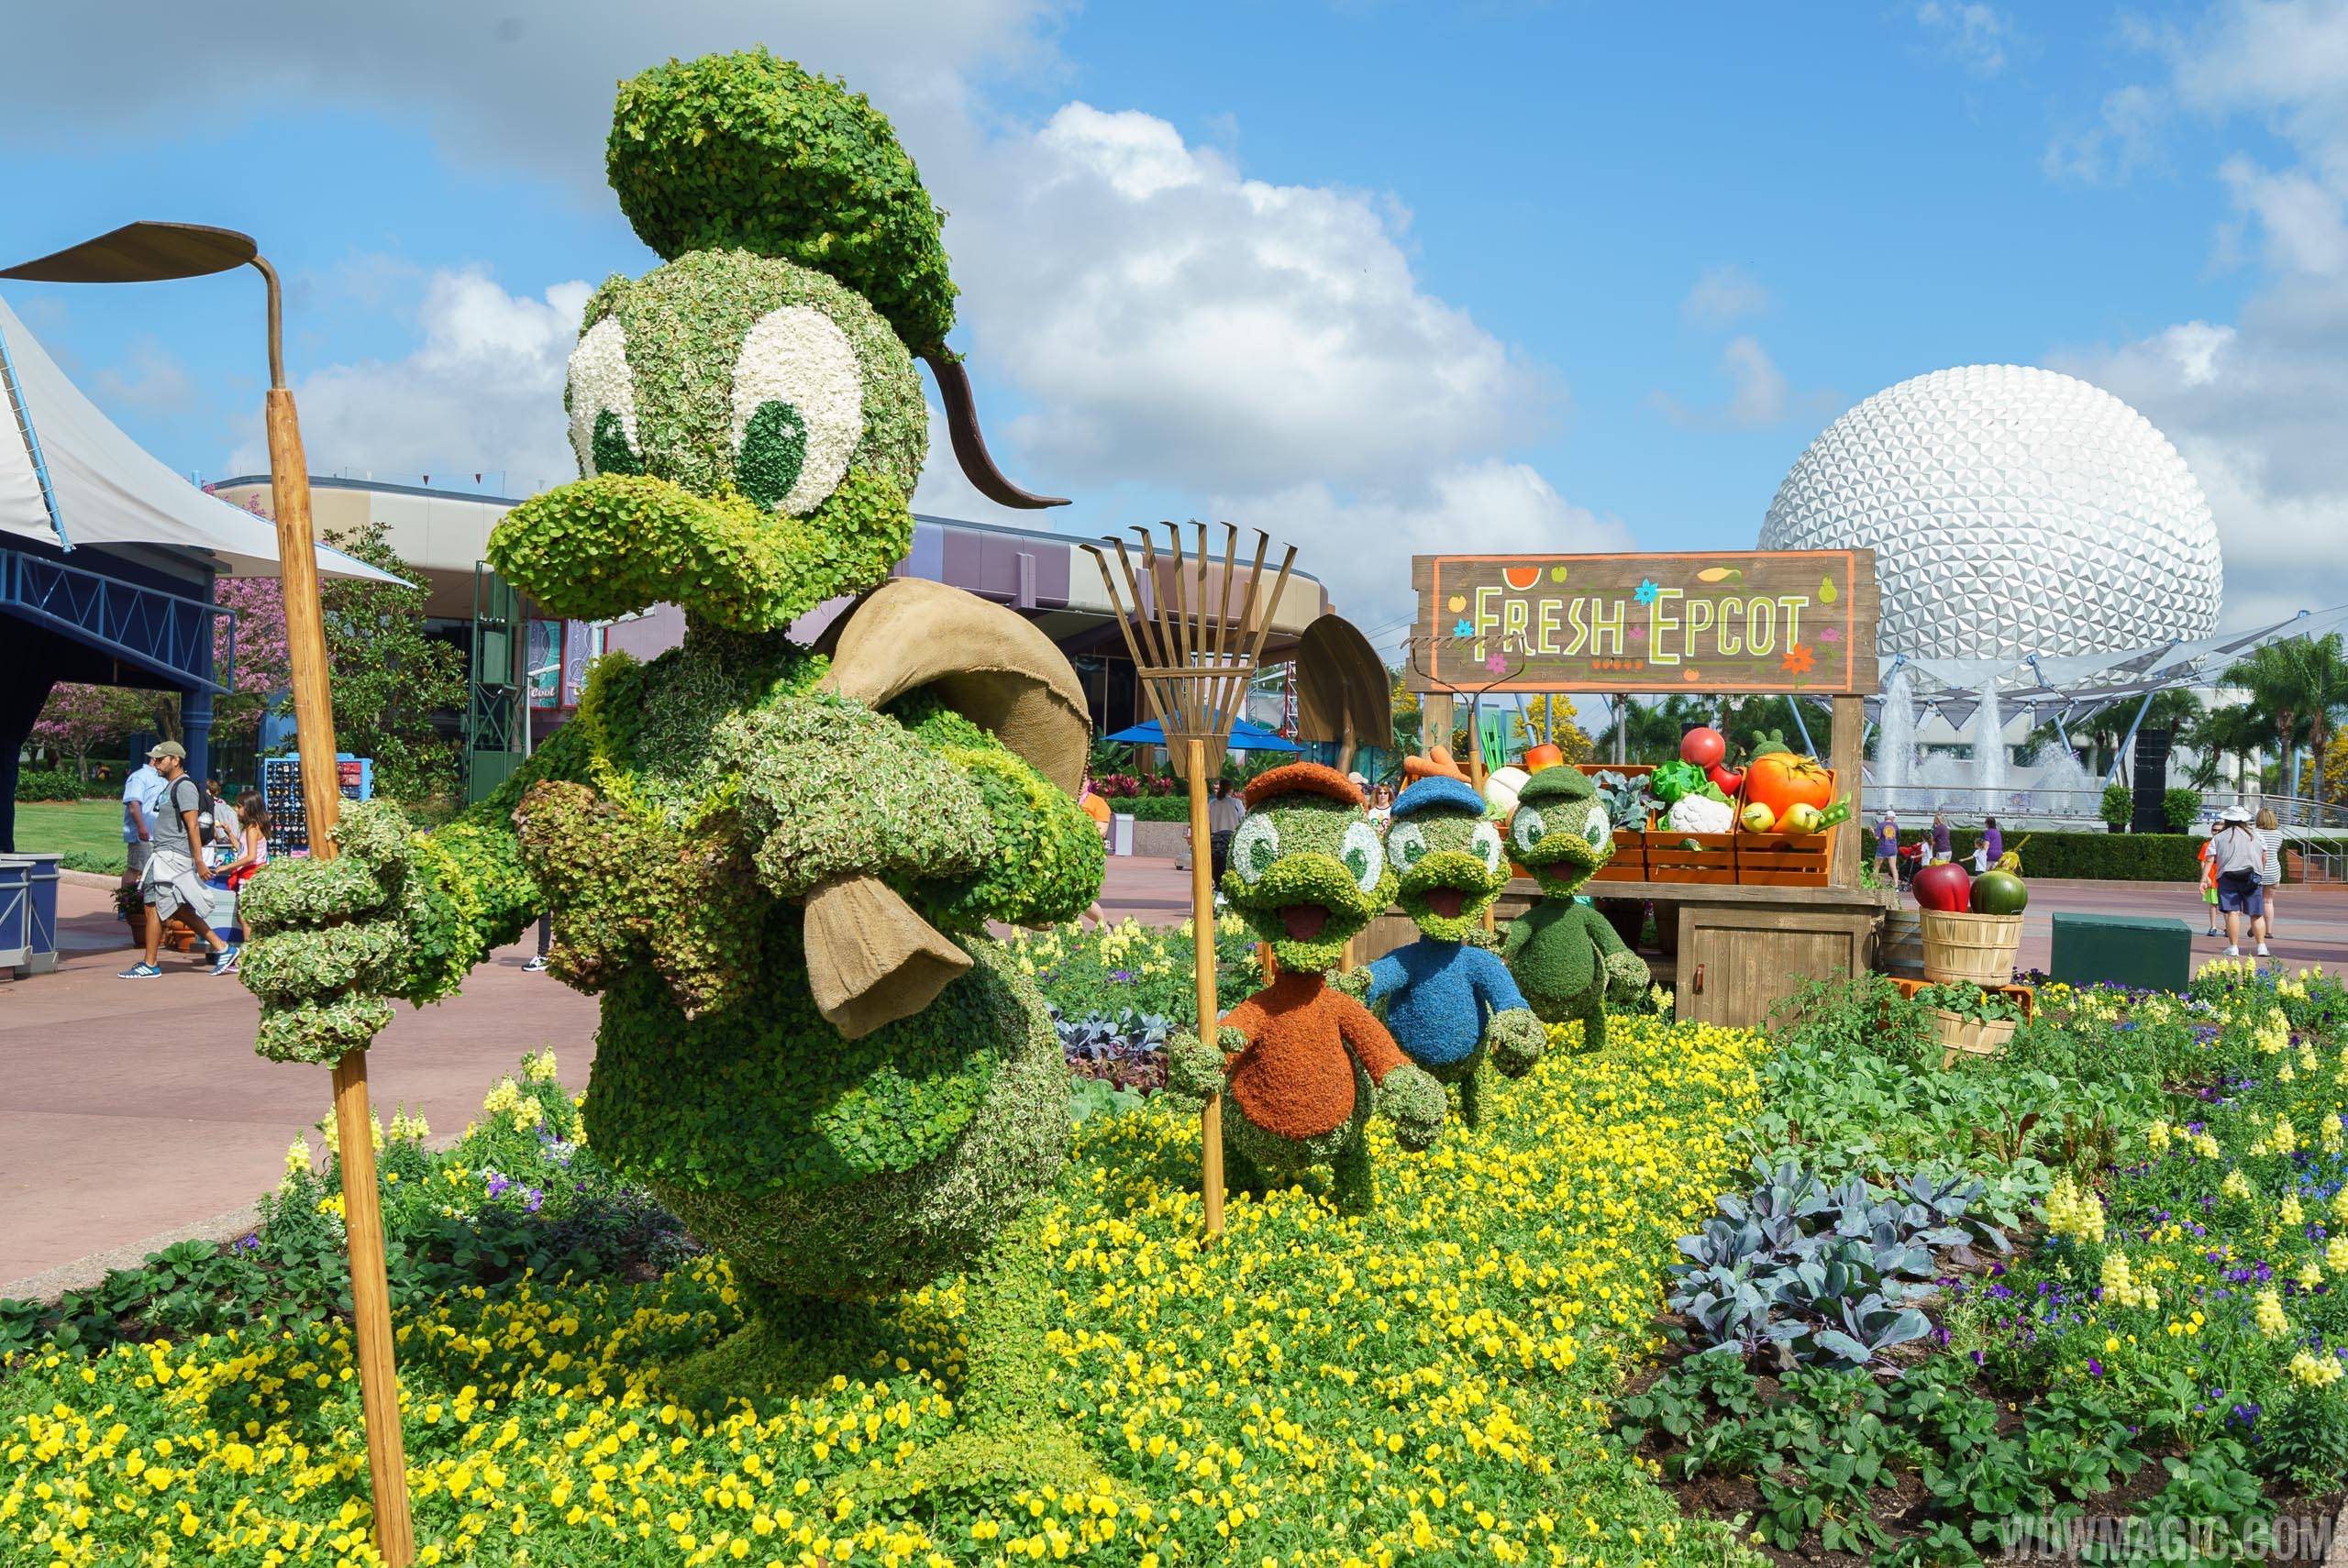 2017 Flower and Garden Festival - Donald Duck, Huey, Dewy and Louie topiaries